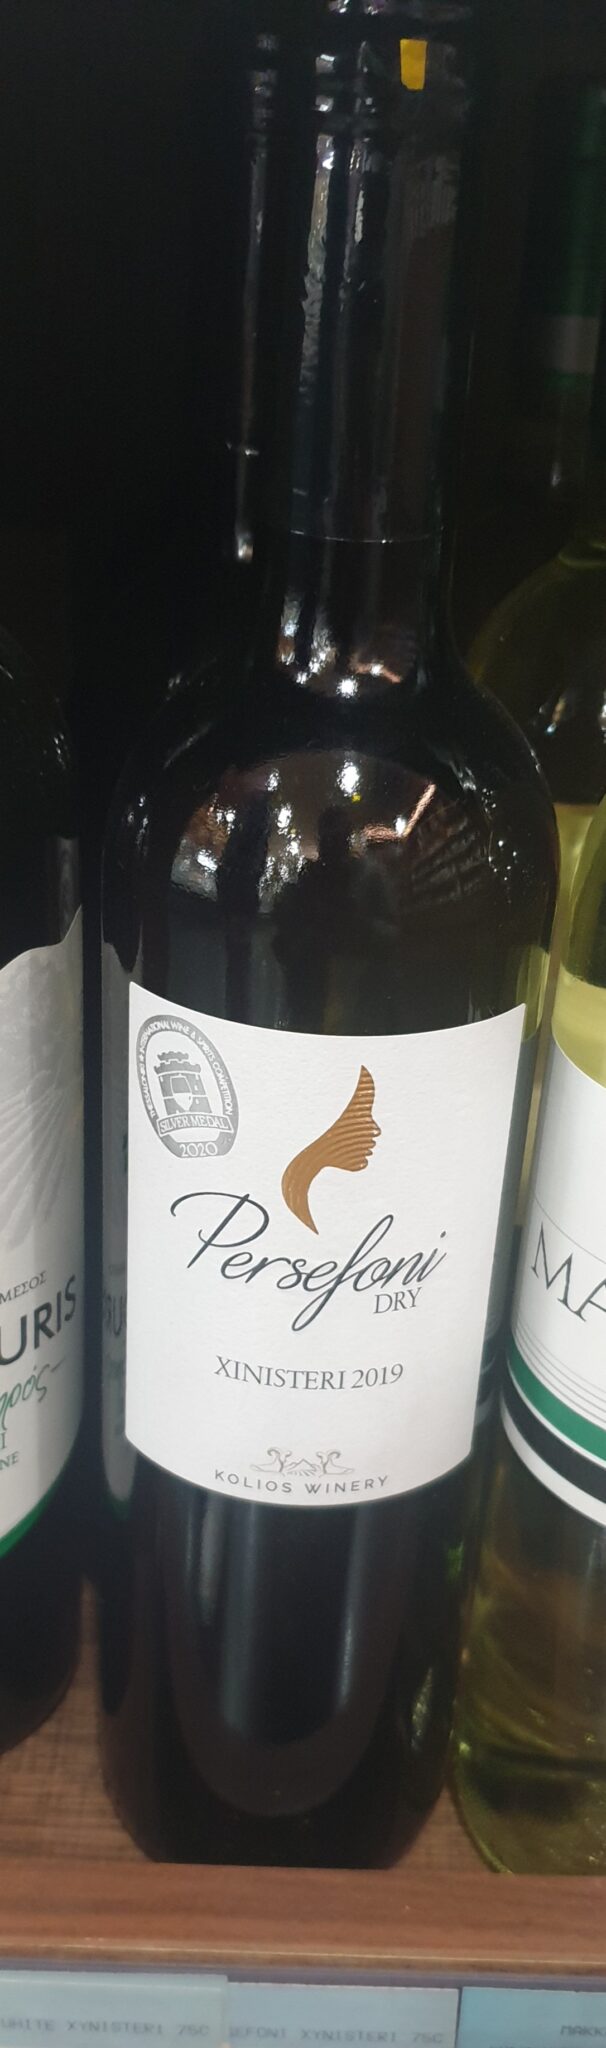 Persefoni xynisteri dry white wine